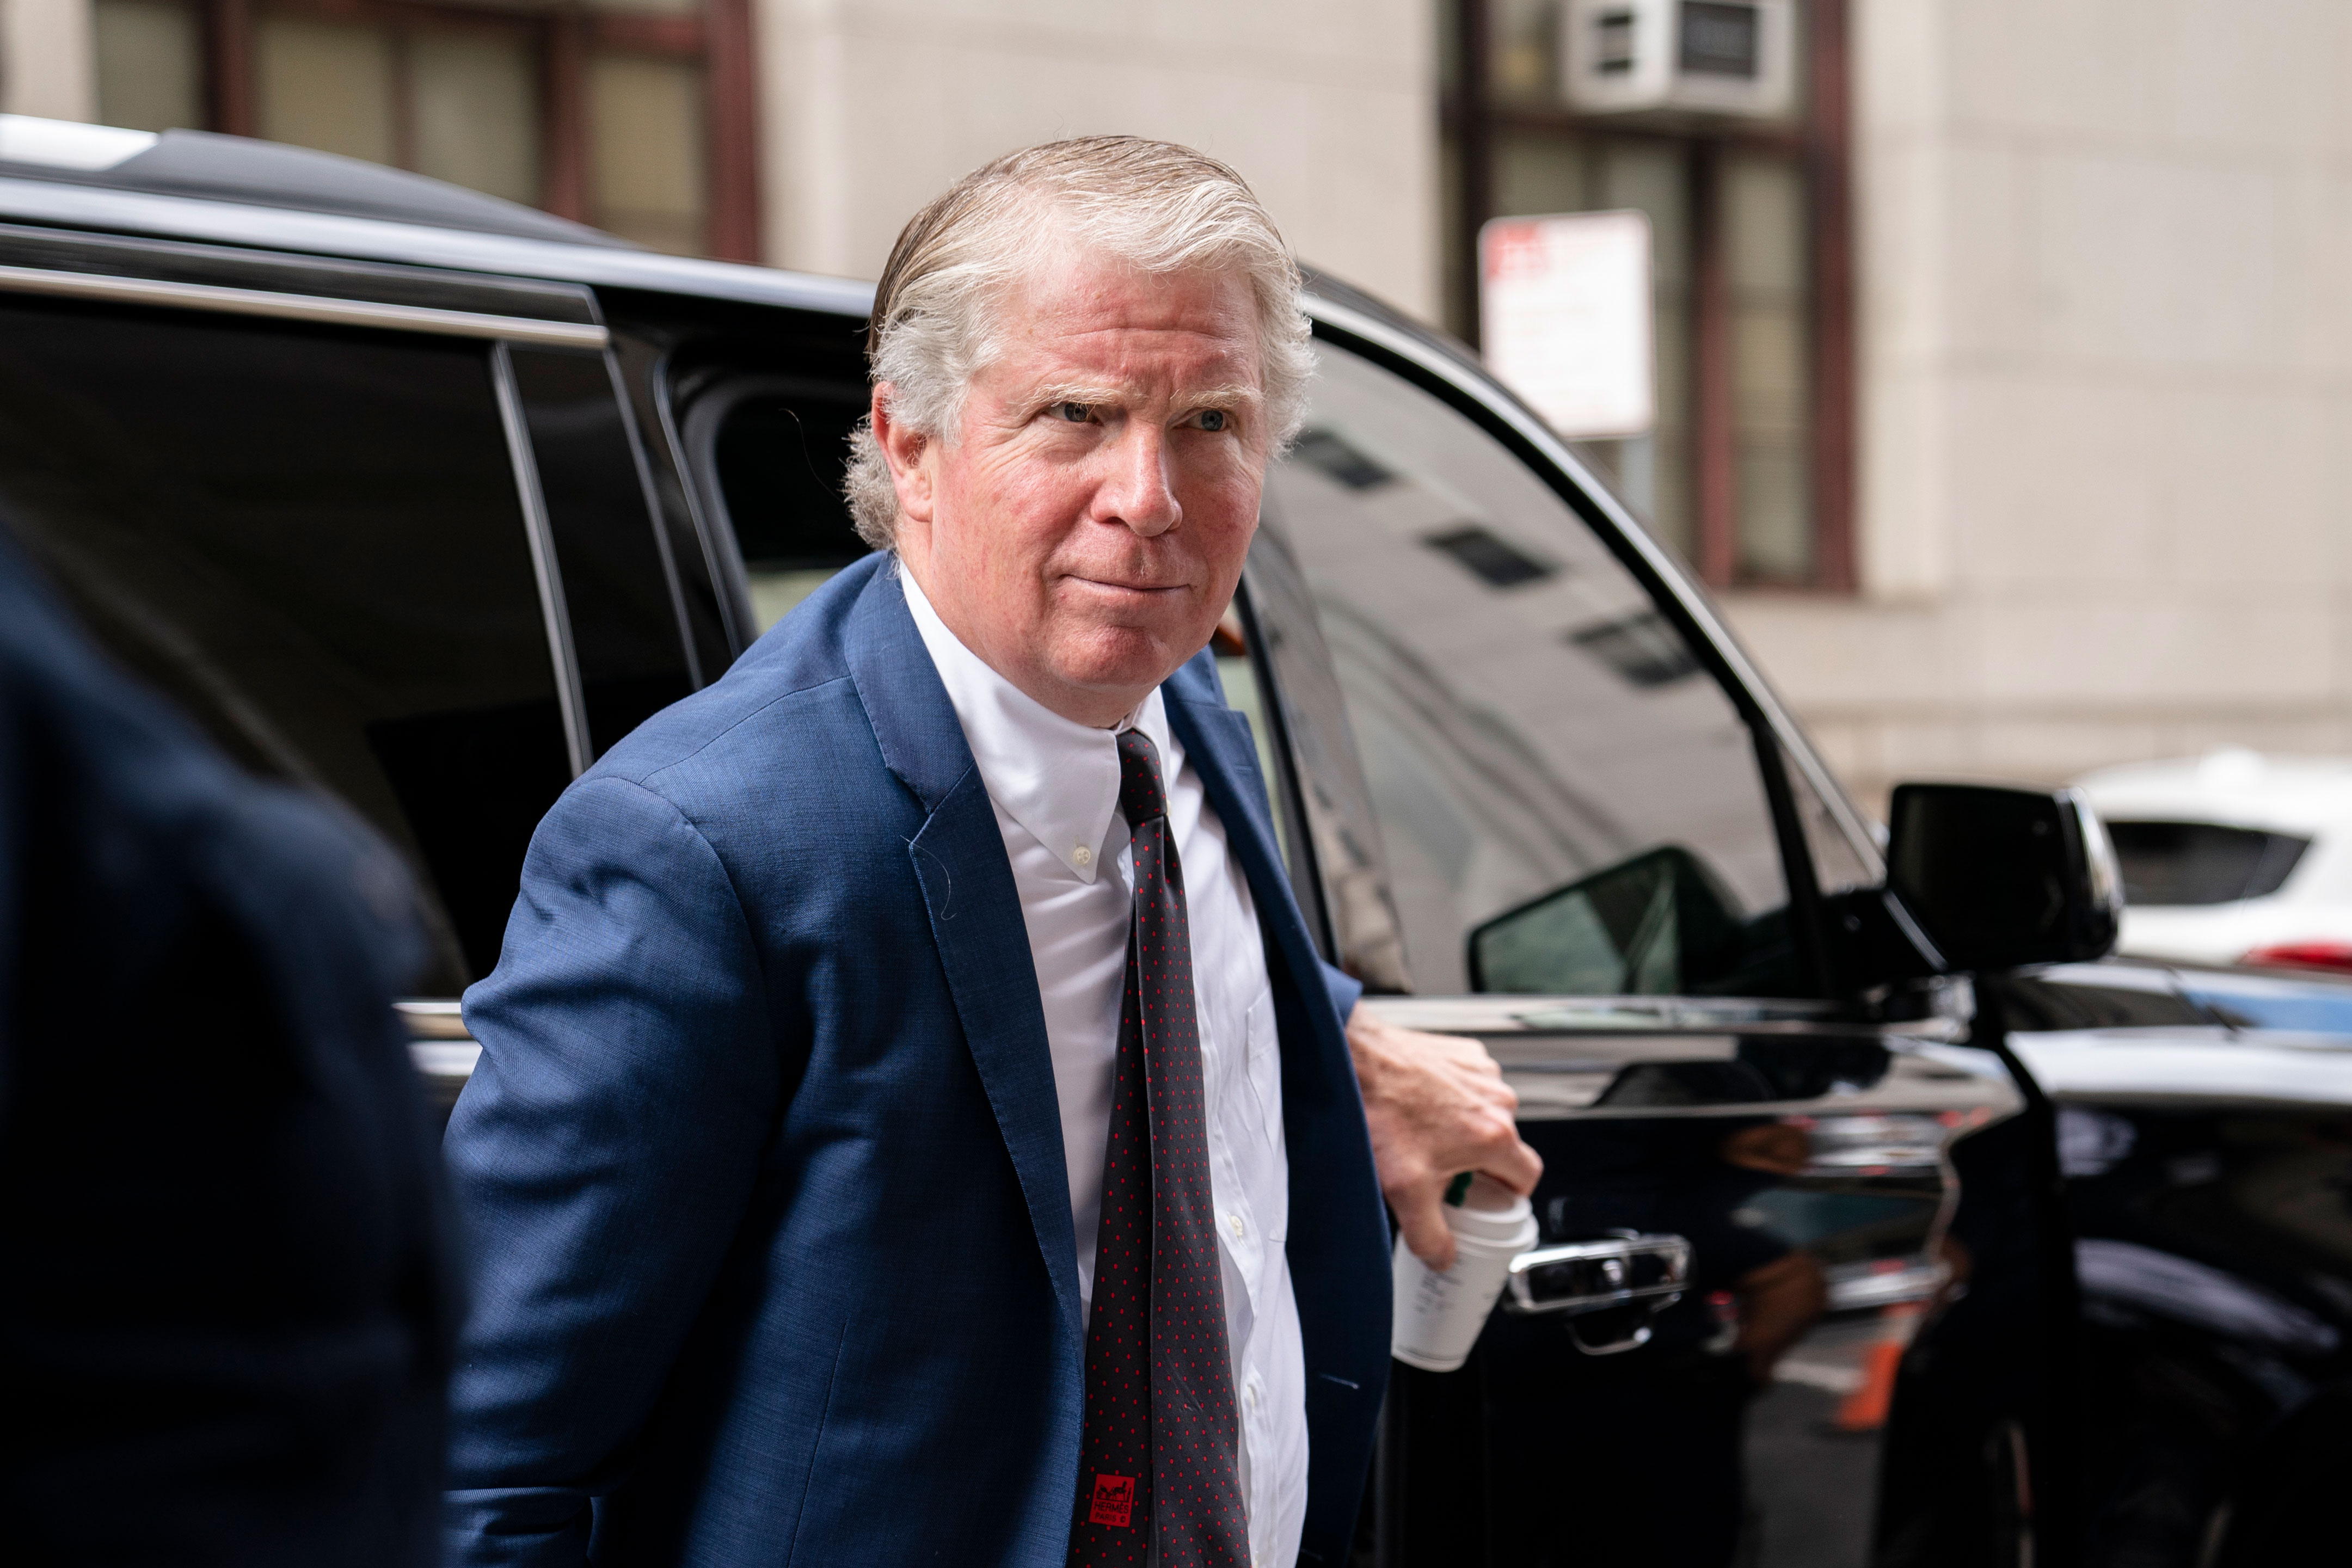 Manhattan district attorney Cyrus Vance, Jr. arrives at the New York State Supreme Court on July 1, 2021.